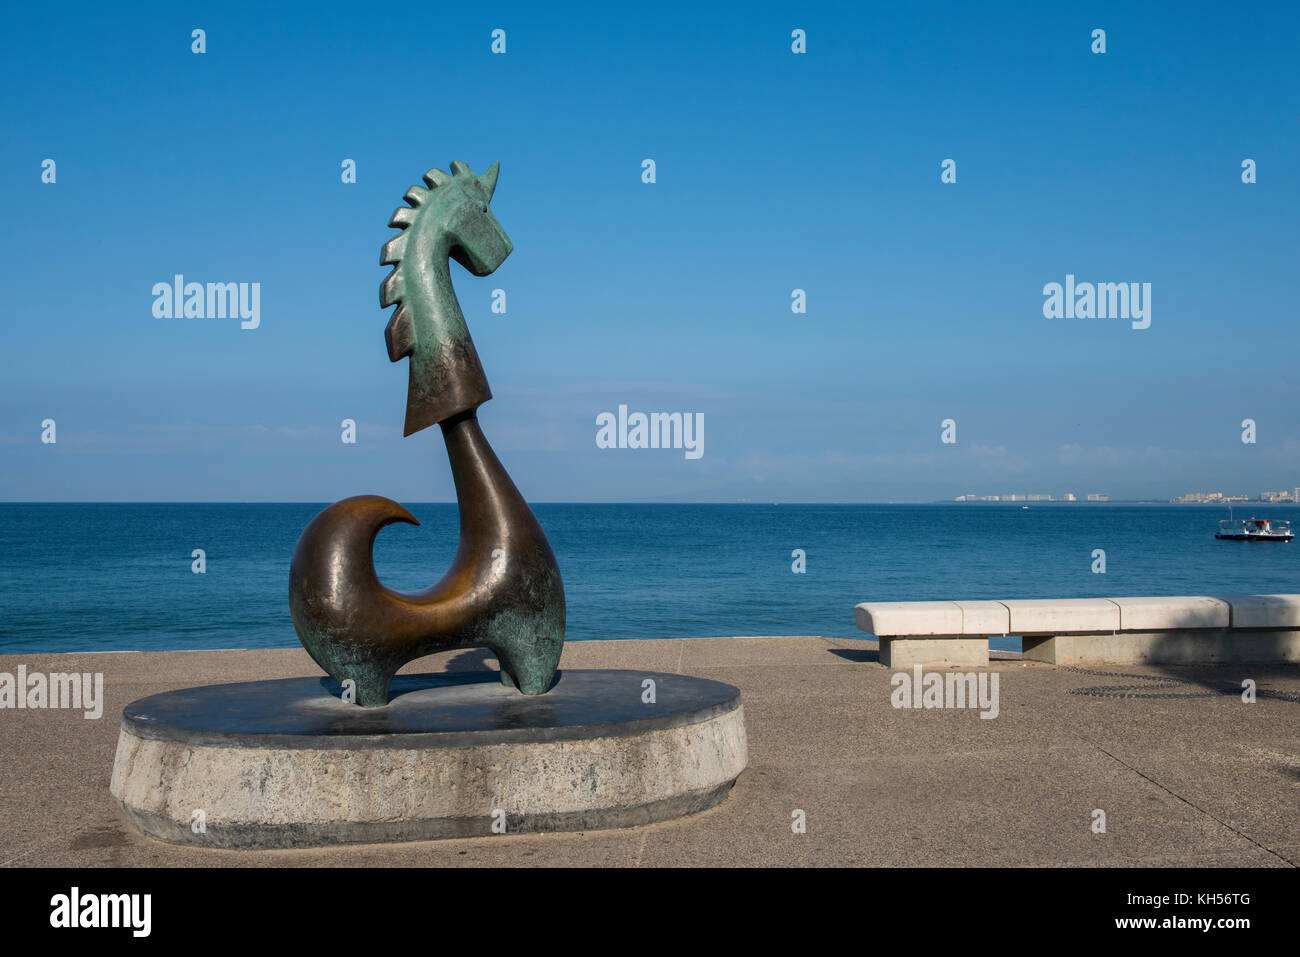 Mexico, State of Jalisco, Puerto Vallarta. El Centro, old part of downtown. The Malecon, waterfront boardwalk known for its local artwork and view of  Stock Photo